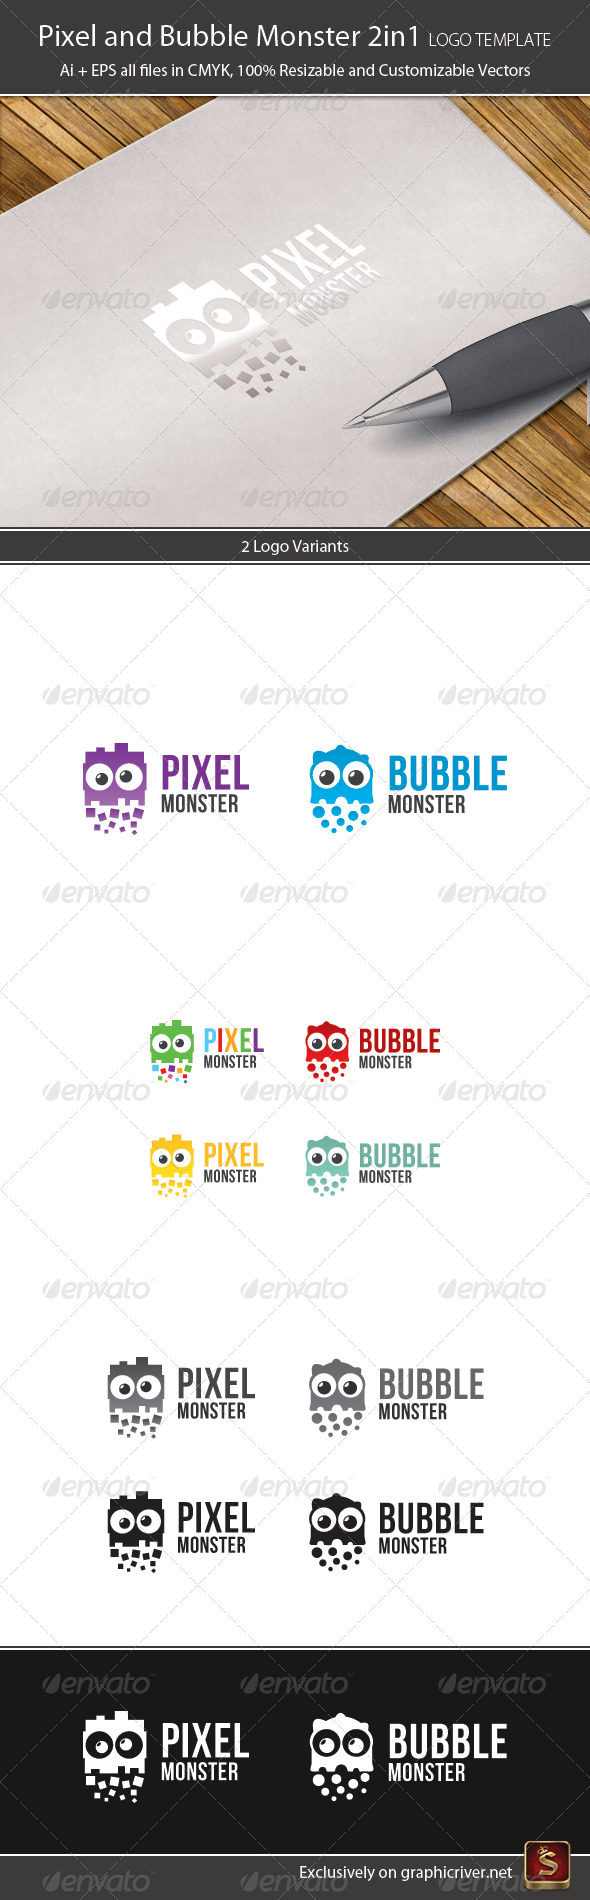 Pixel and Bubble Monster Logo Template 2in1